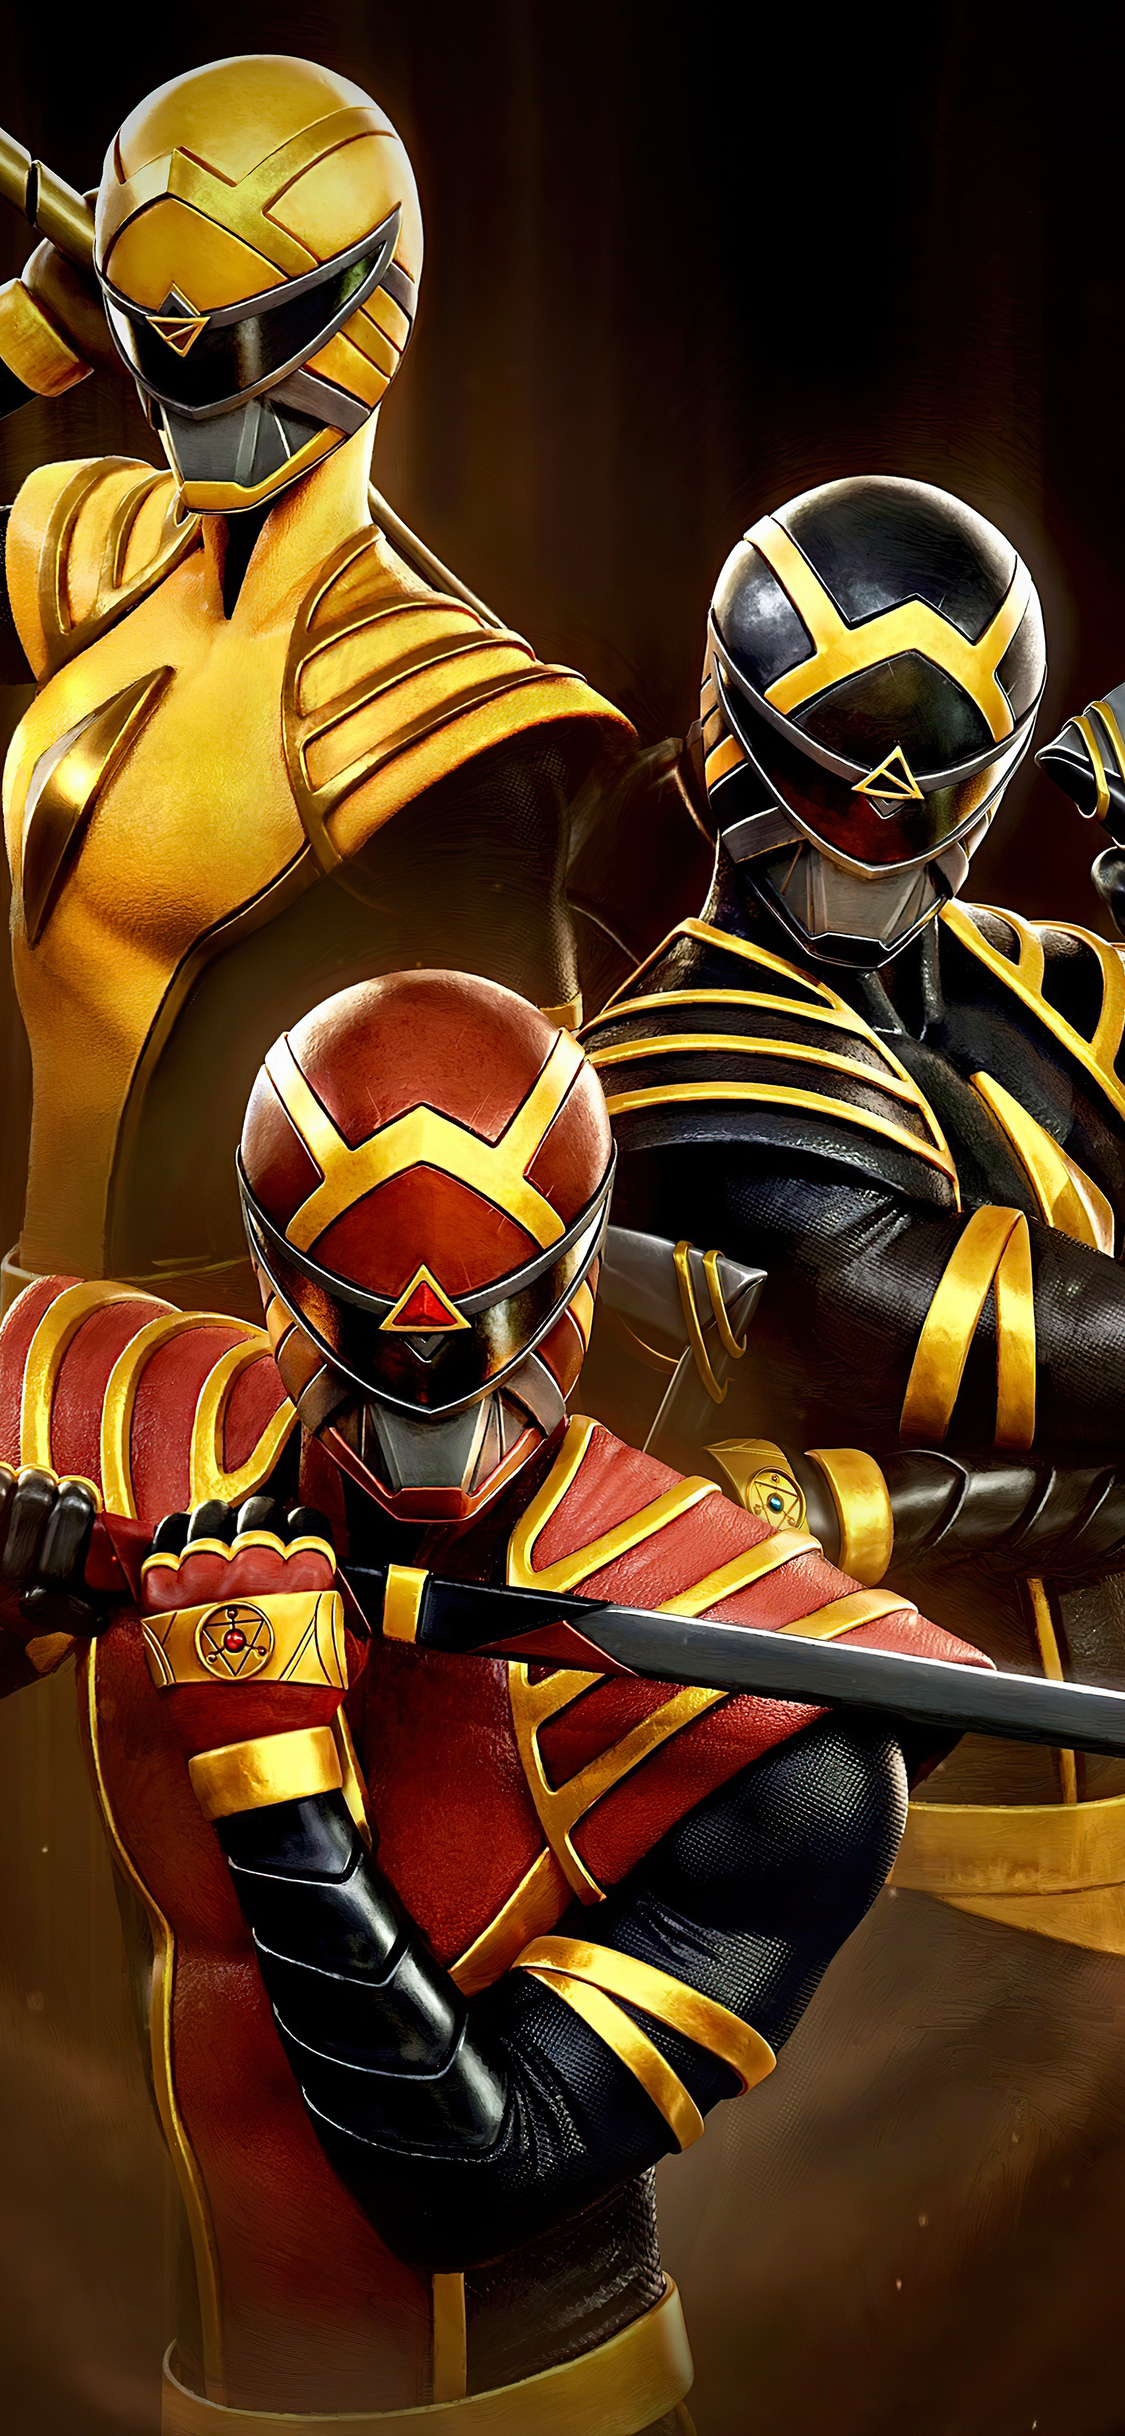 1125x2436 Omega Rangers 4k Iphone Xs Iphone 10 Iphone X Hd 4k Wallpapers Images Backgrounds Photos And Pictures